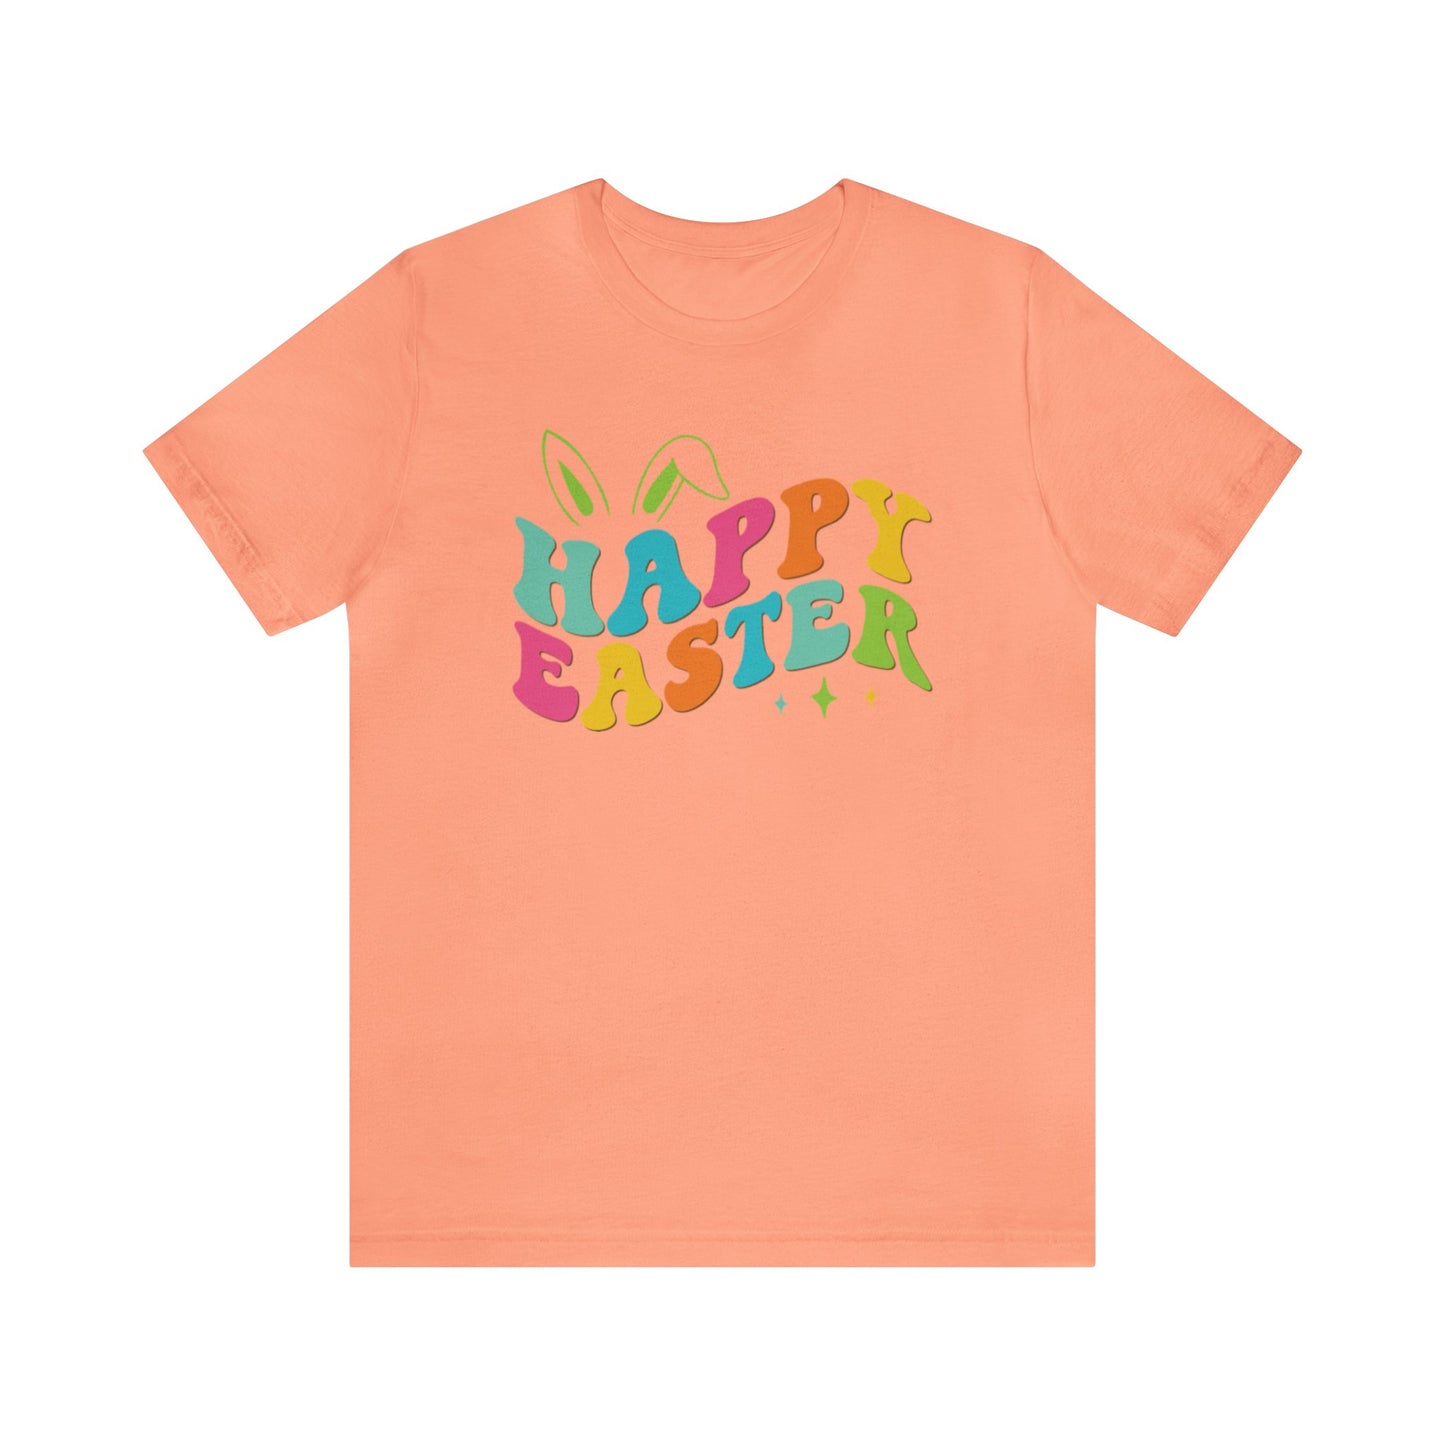 Bunny Ears T-Shirt For Happy Easter T Shirt For Colorful Rabbit Ears TShirt